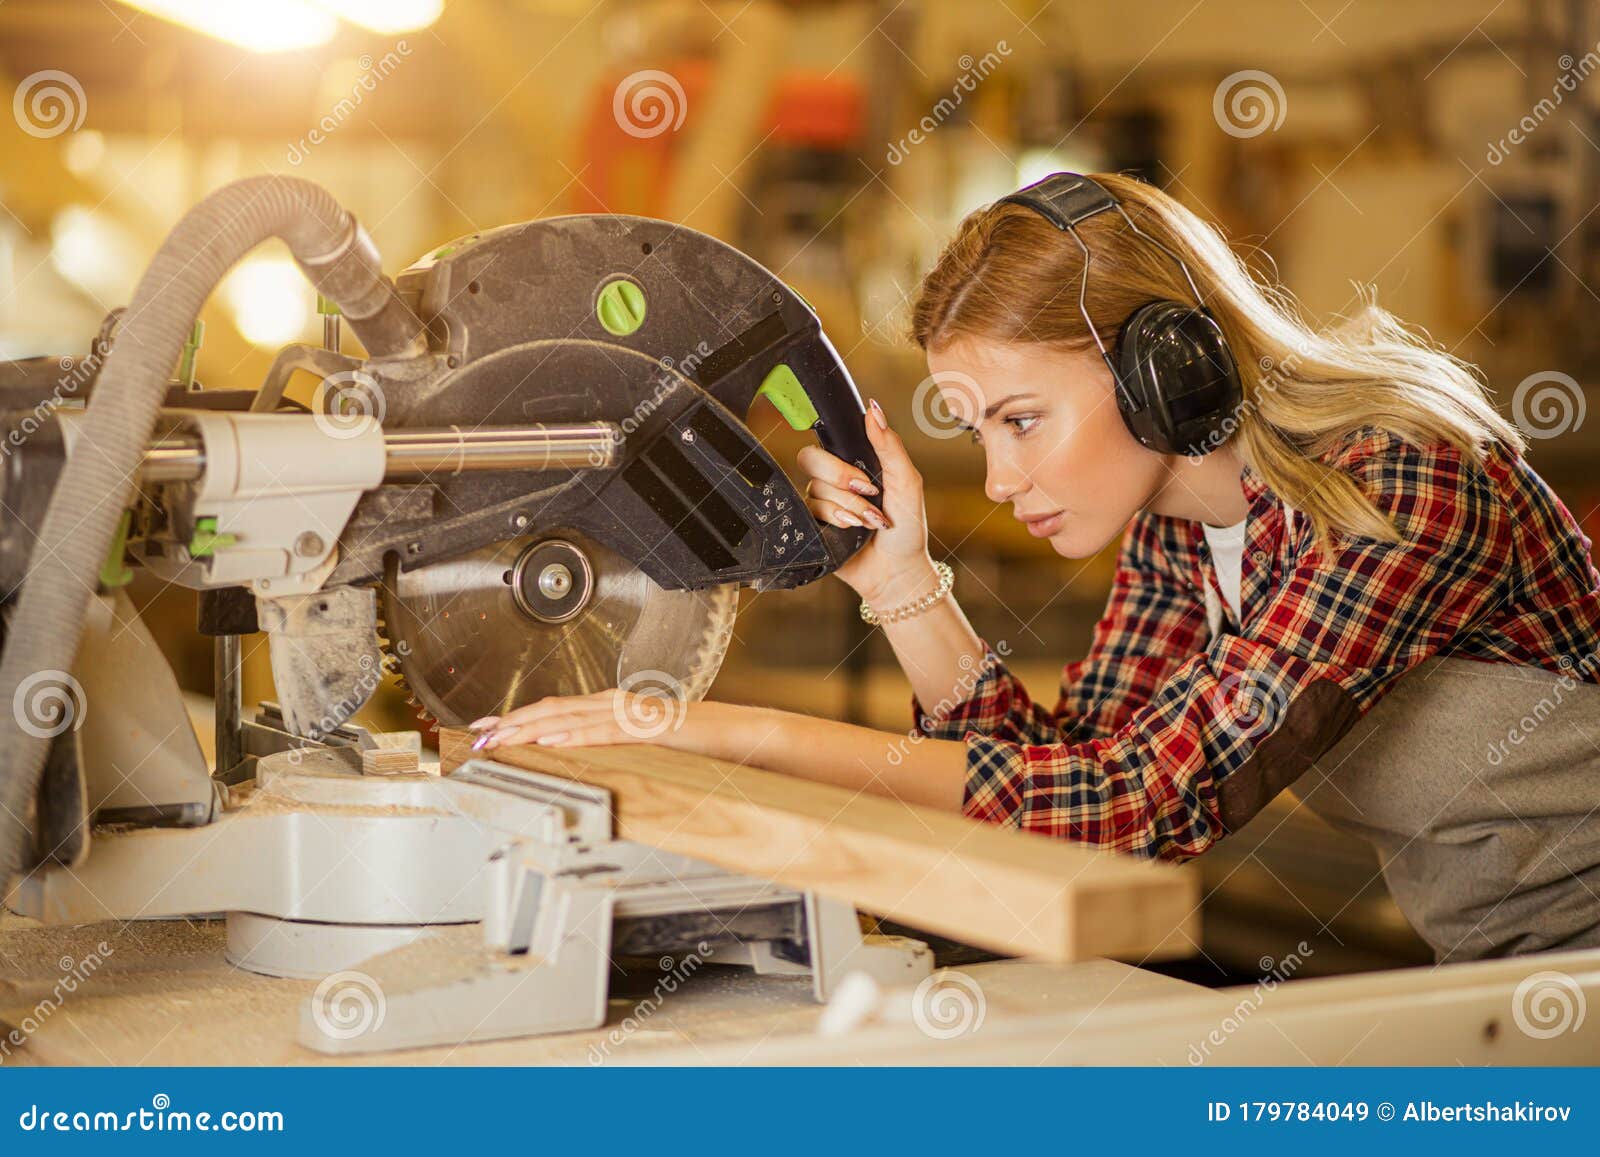 Sexy Female Carpenter Photos Free Royalty Free Stock Photos From Dreamstime